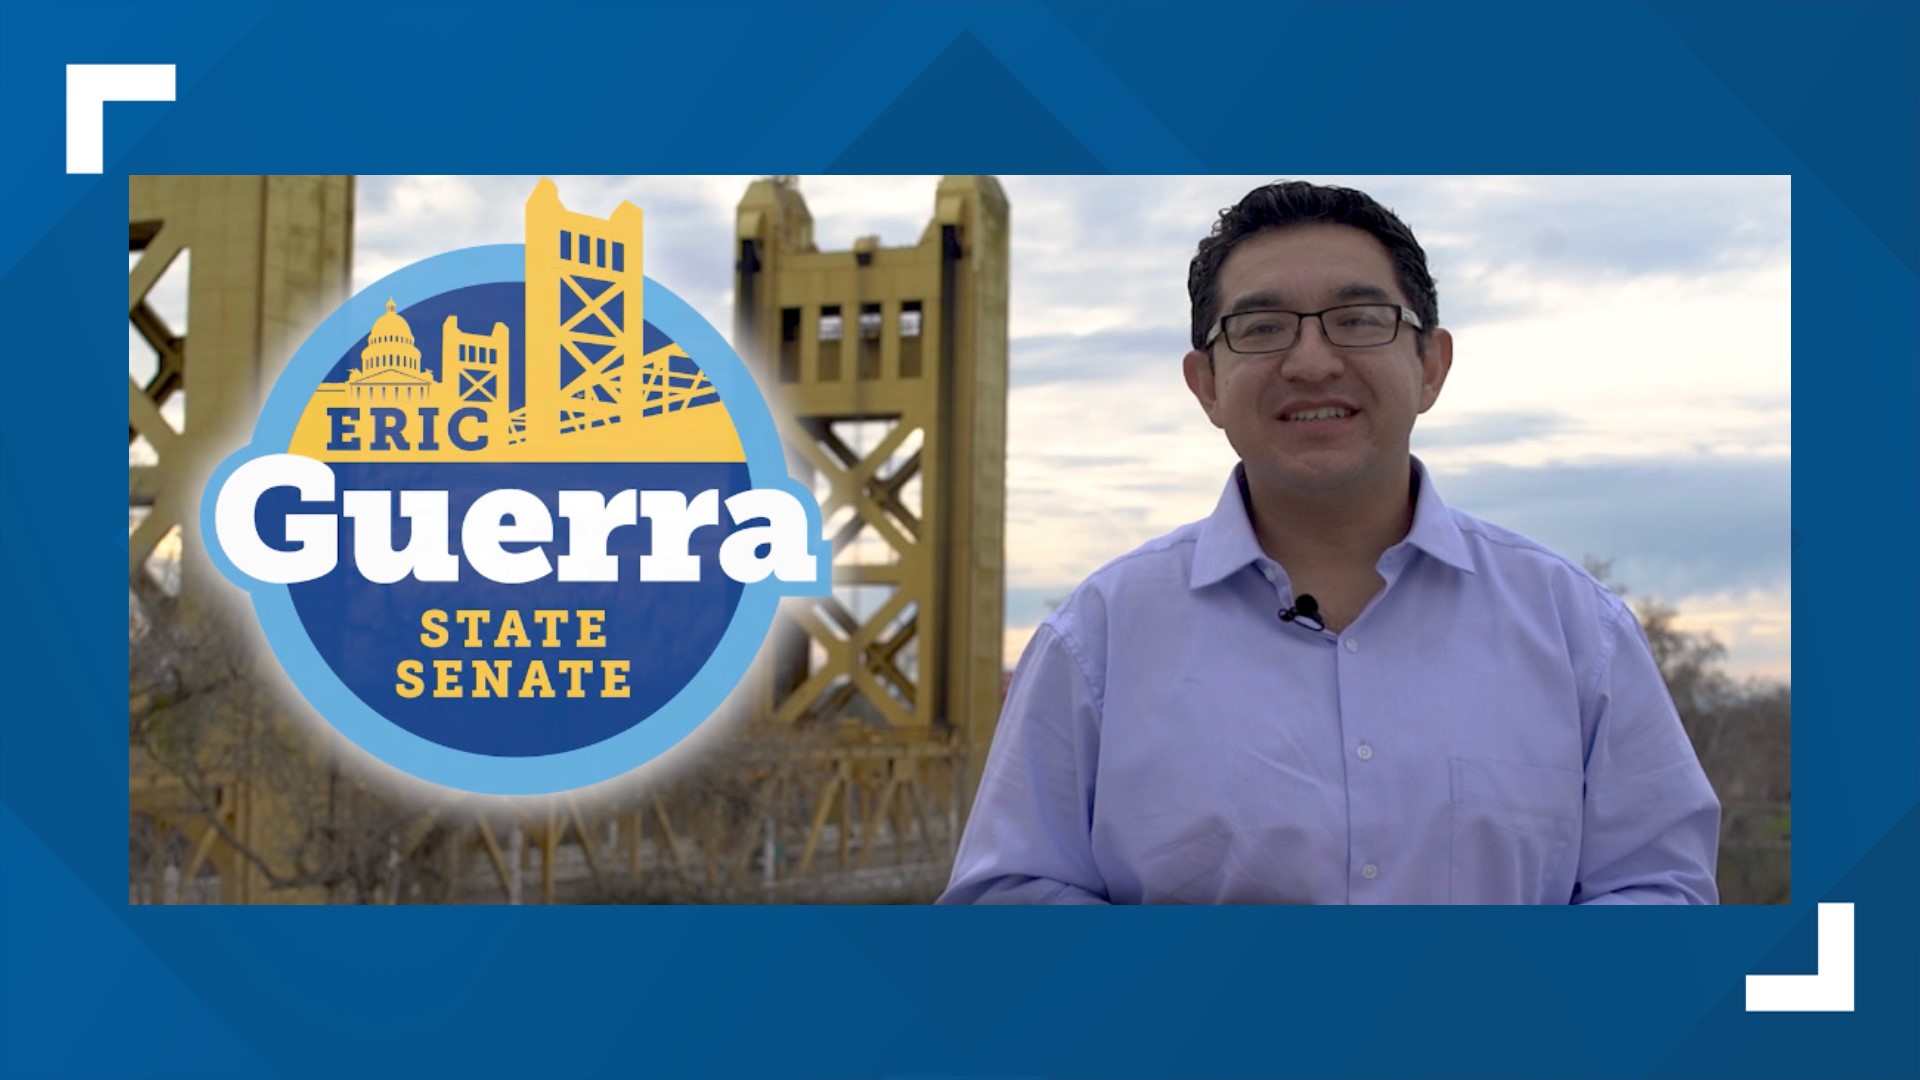 Sacramento City Councilmember Eric Guerra said he wants to run to help California families by focusing on education and affordable housing as some of his key issues.